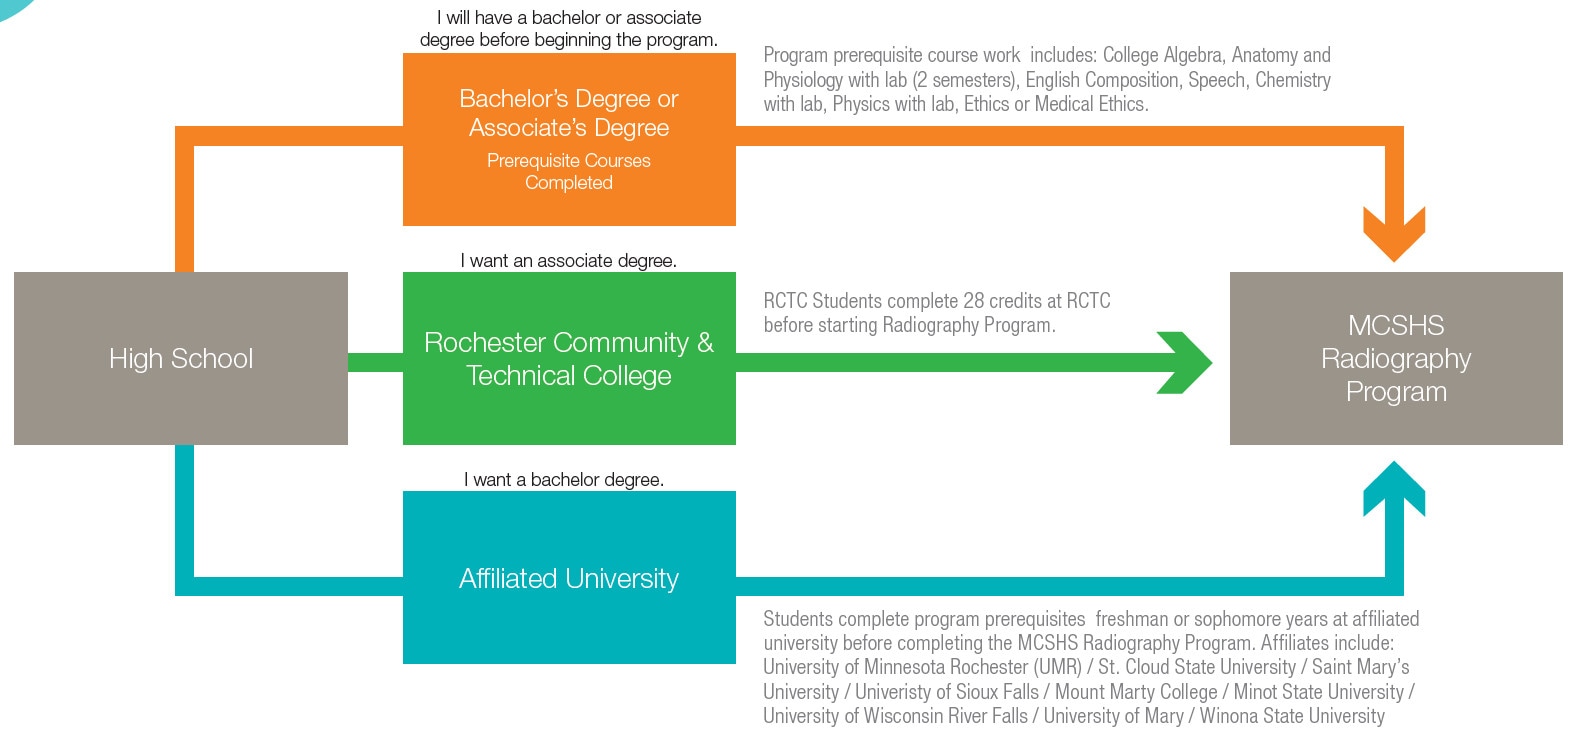 Informative diagram of the application pathways from high school to Mayo Clinic School of Health Sciences Radiography Program